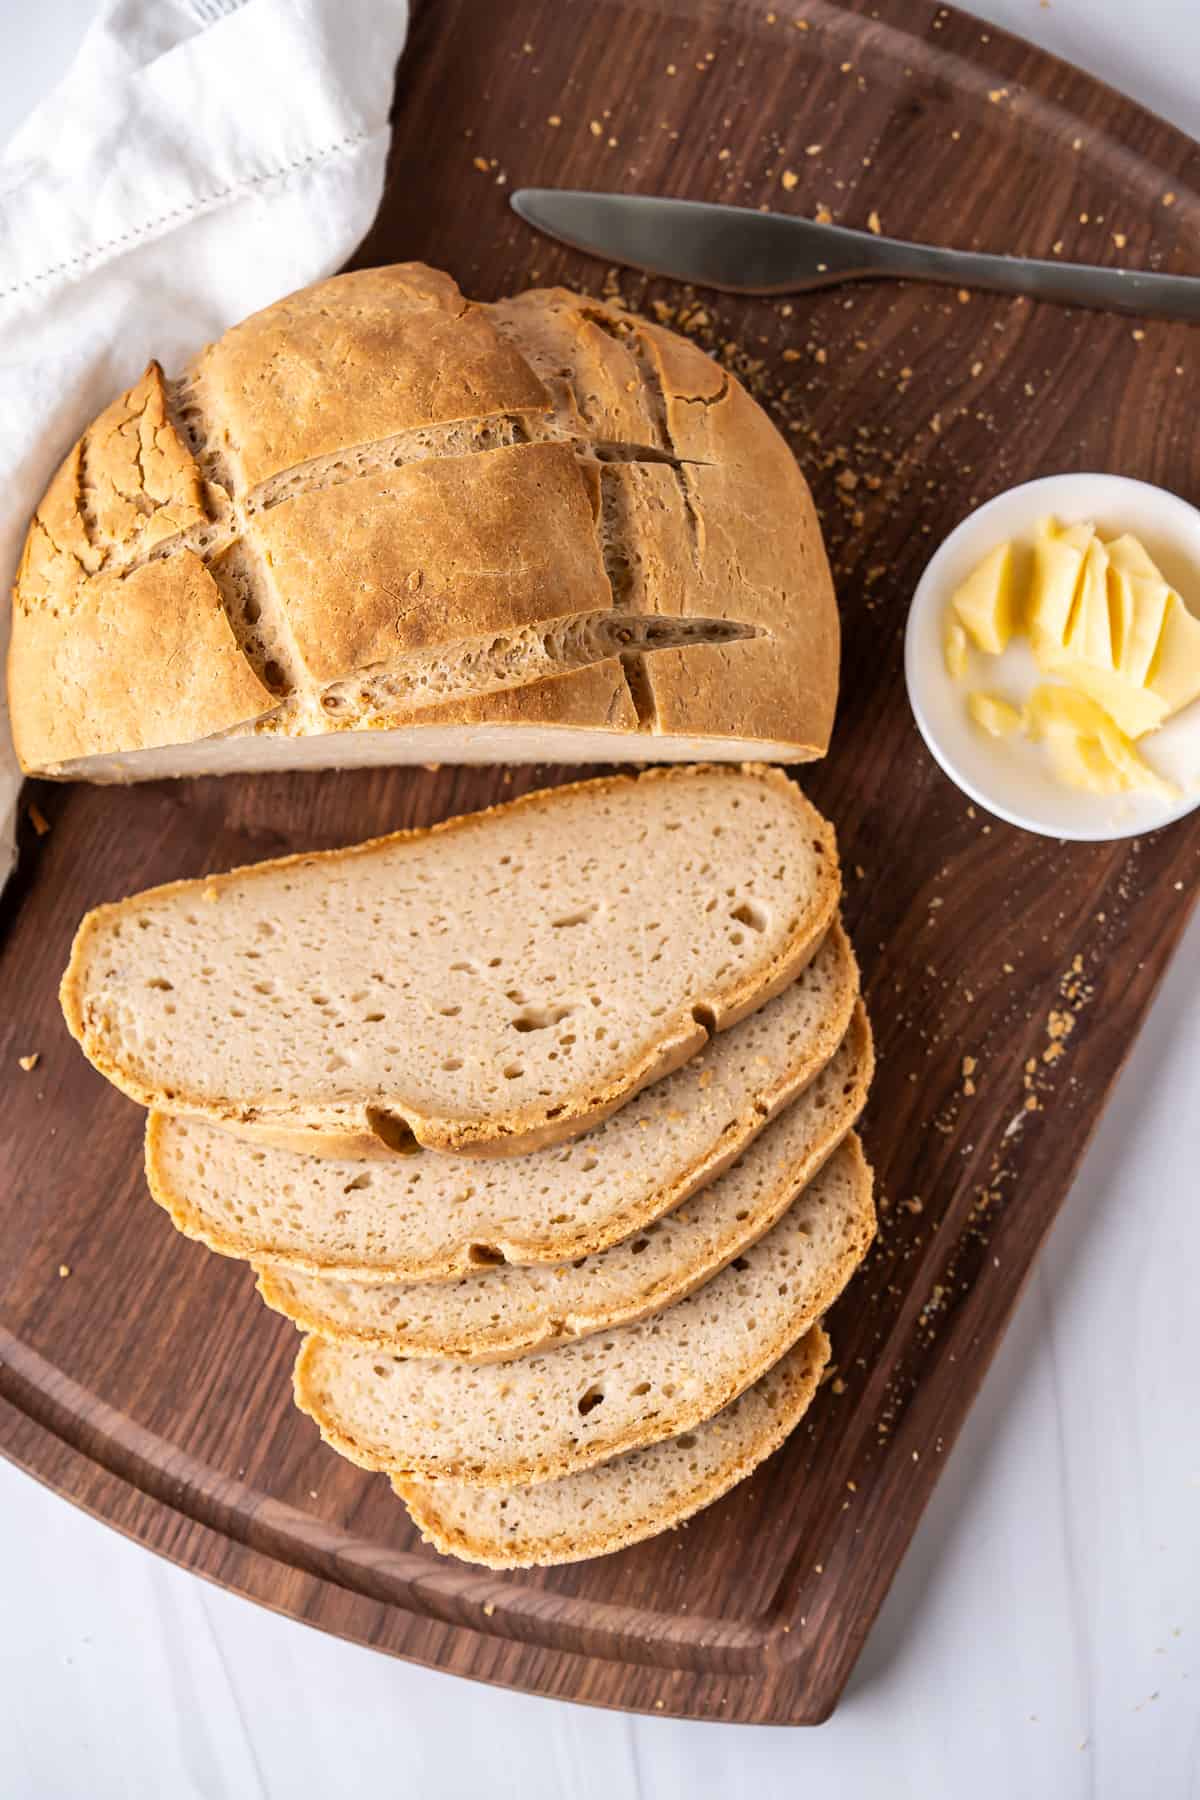 Sliced gluten-free artisan bread to show the thin slices and perfect bread consistency.